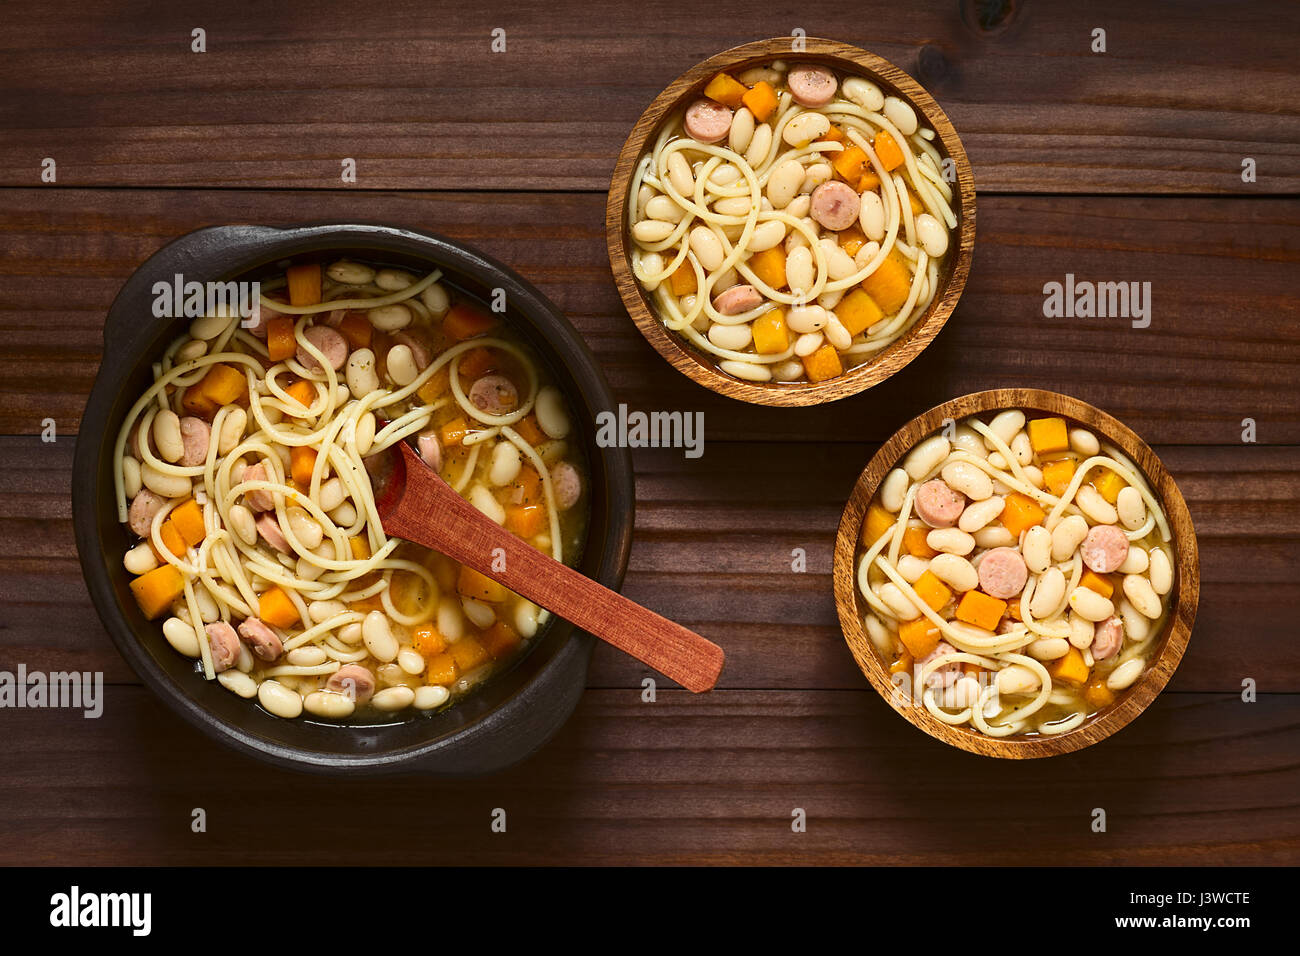 Chilean traditional Porotos con Riendas (beans with reins) dish of cooked dried beans with pumpkin, onion, spaghetti and sausage, in rustic bowls Stock Photo